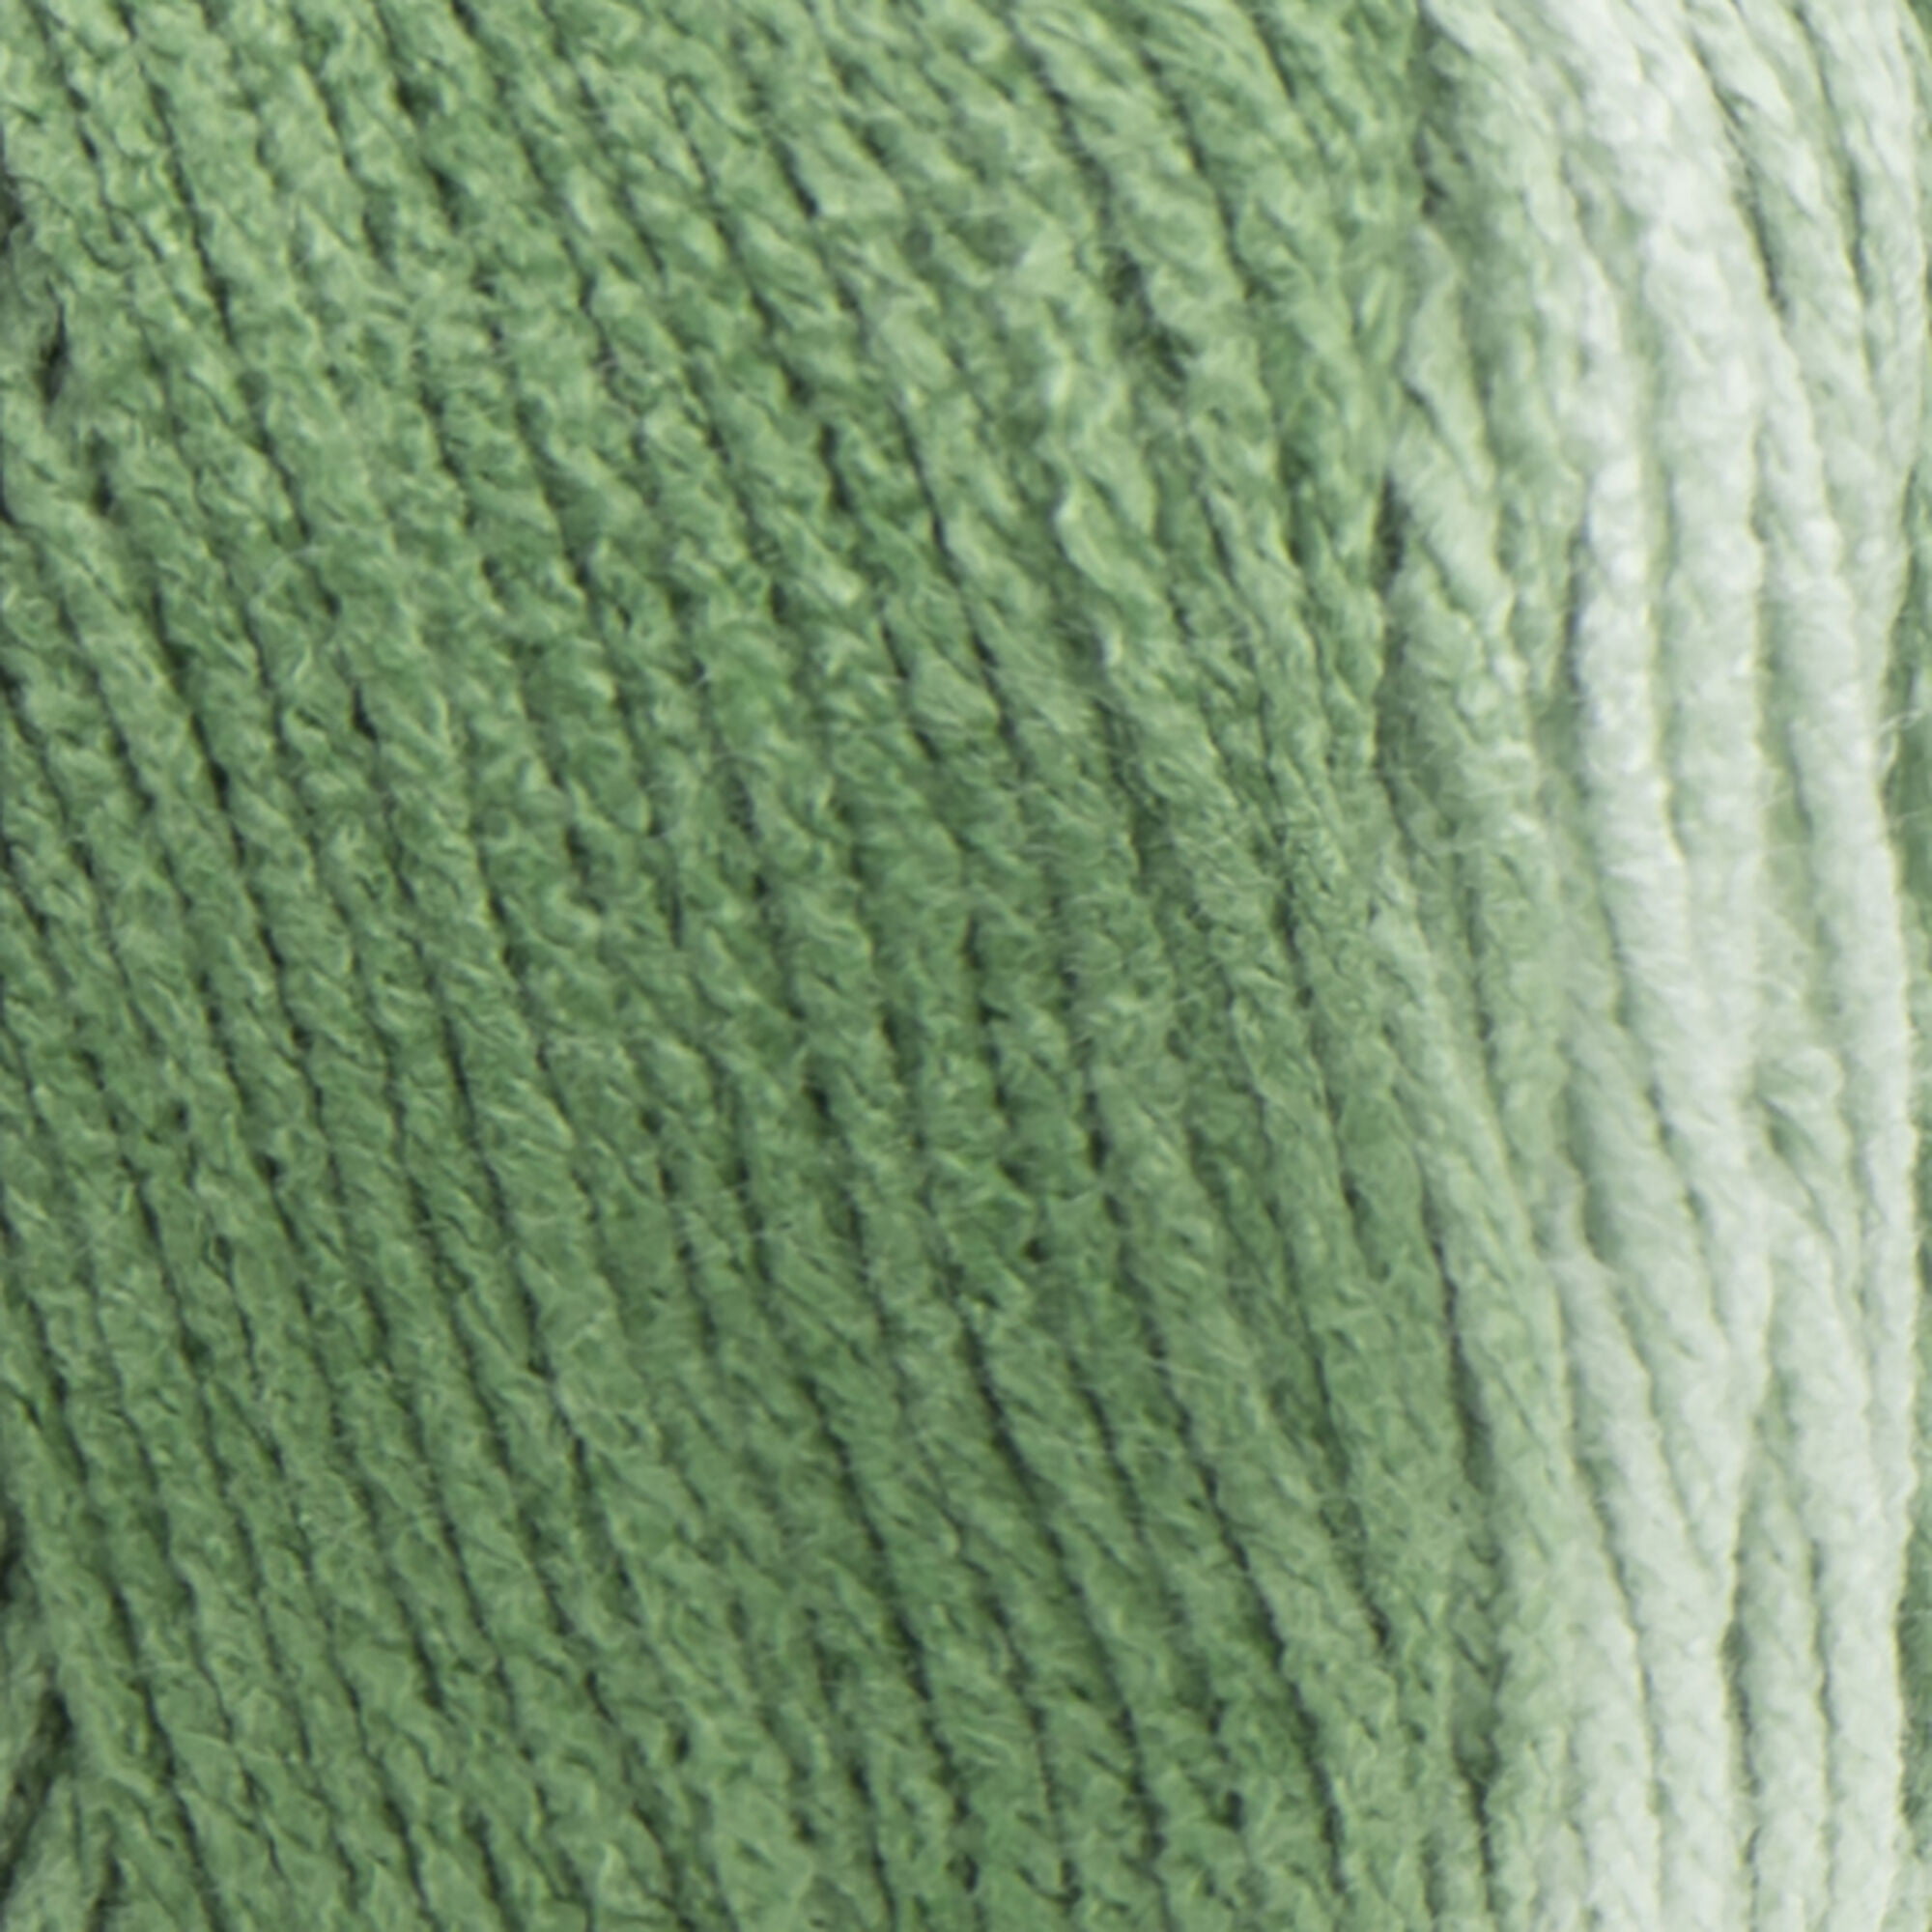 Red Heart Super Saver Ombre Yarn-Green Apple, 1 count - Baker's